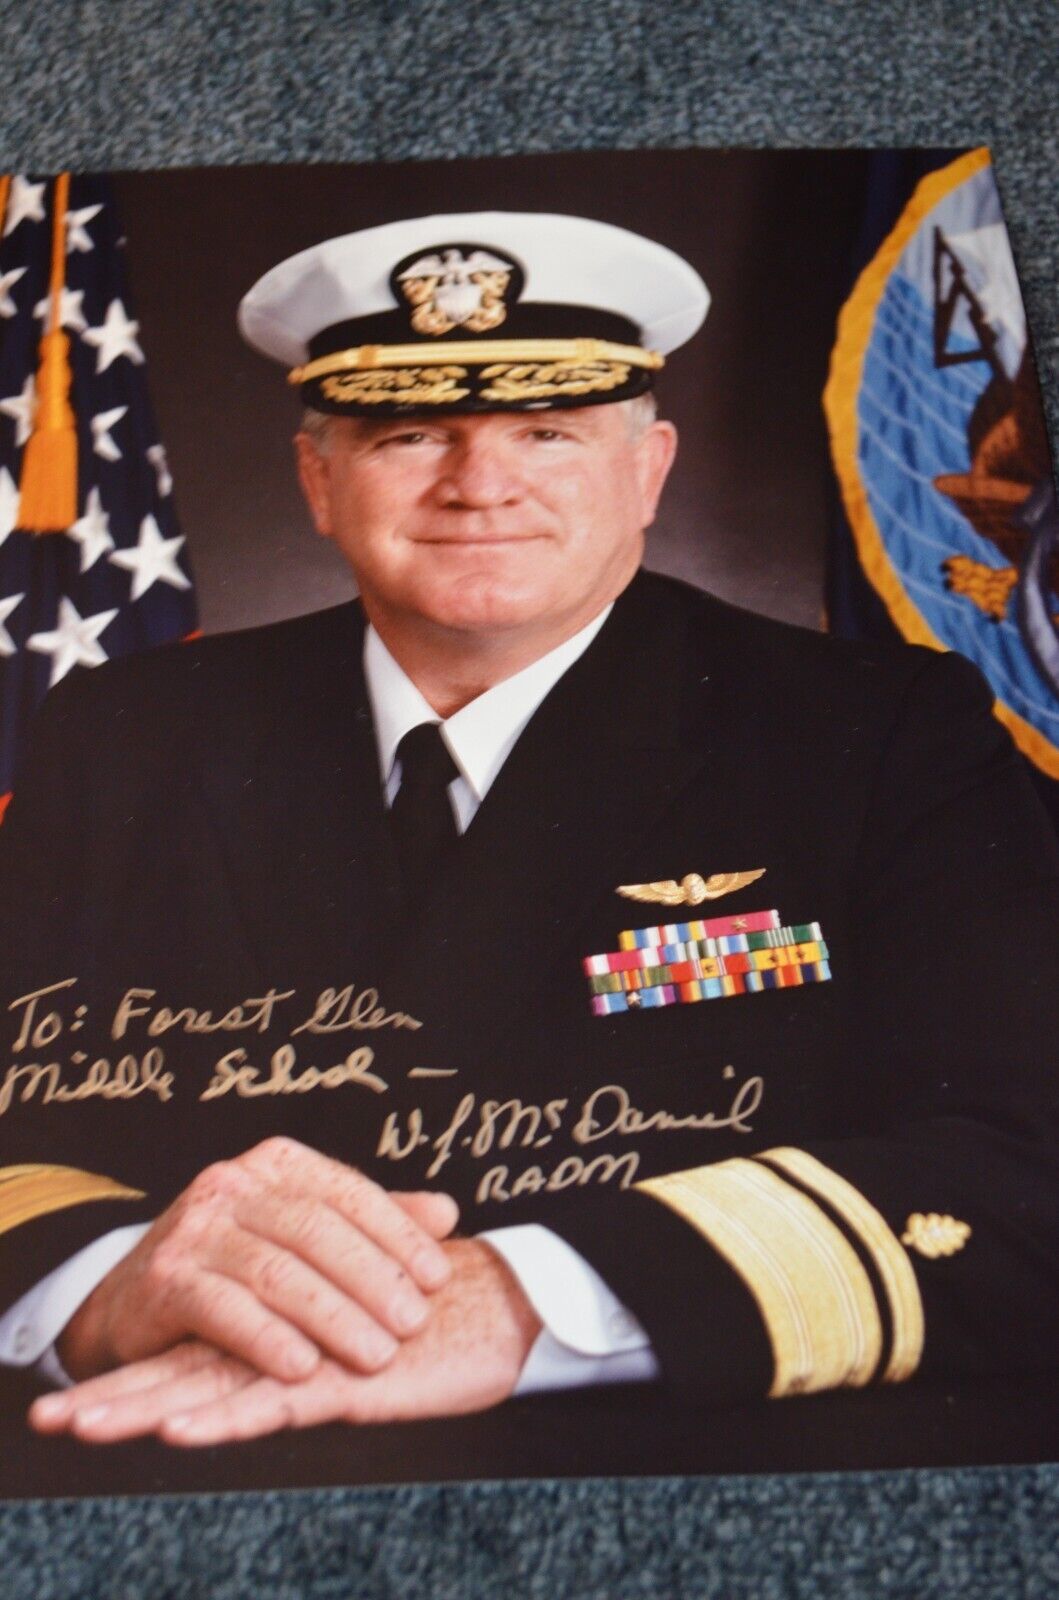 Admiral William McDaniel Signed 8x10 Photo - Navy Medical Center